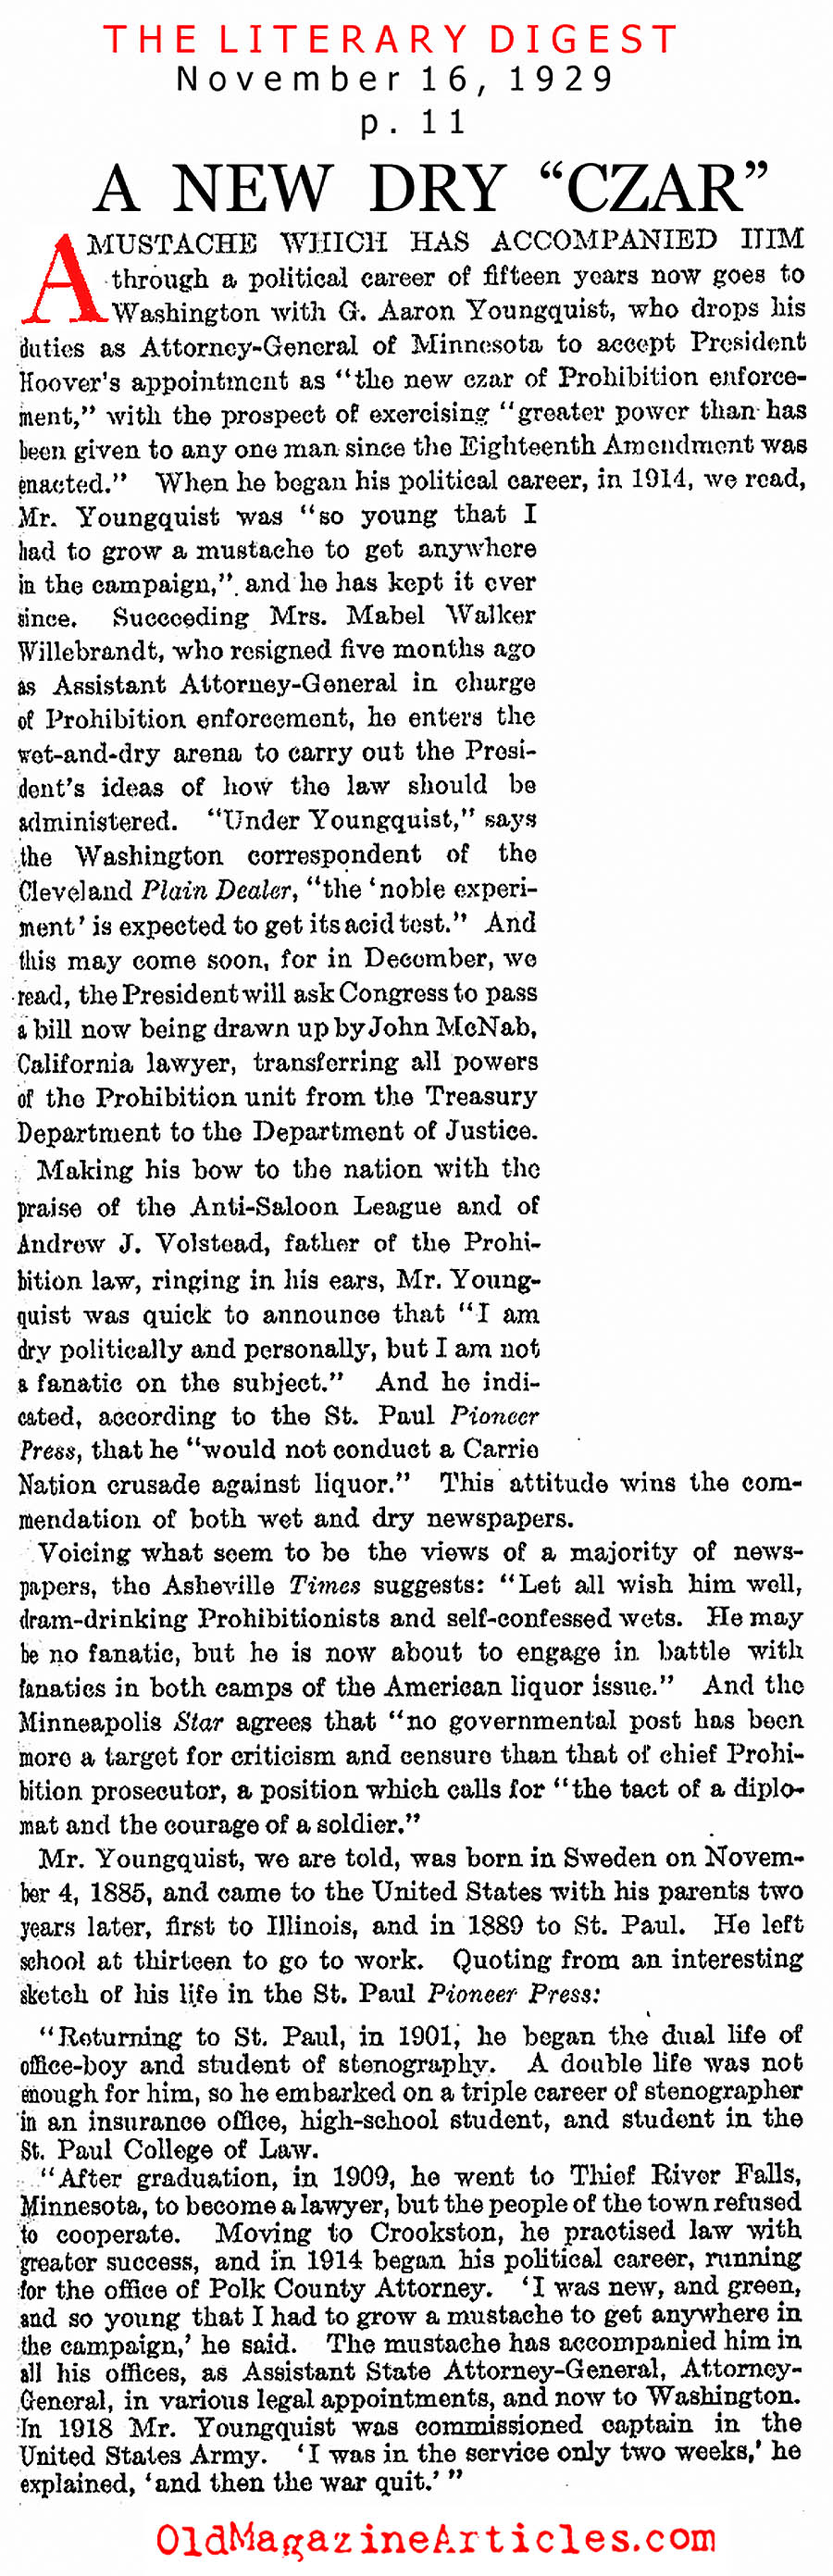 The New Guy Who Took Her Place (Literary Digest, 1929)